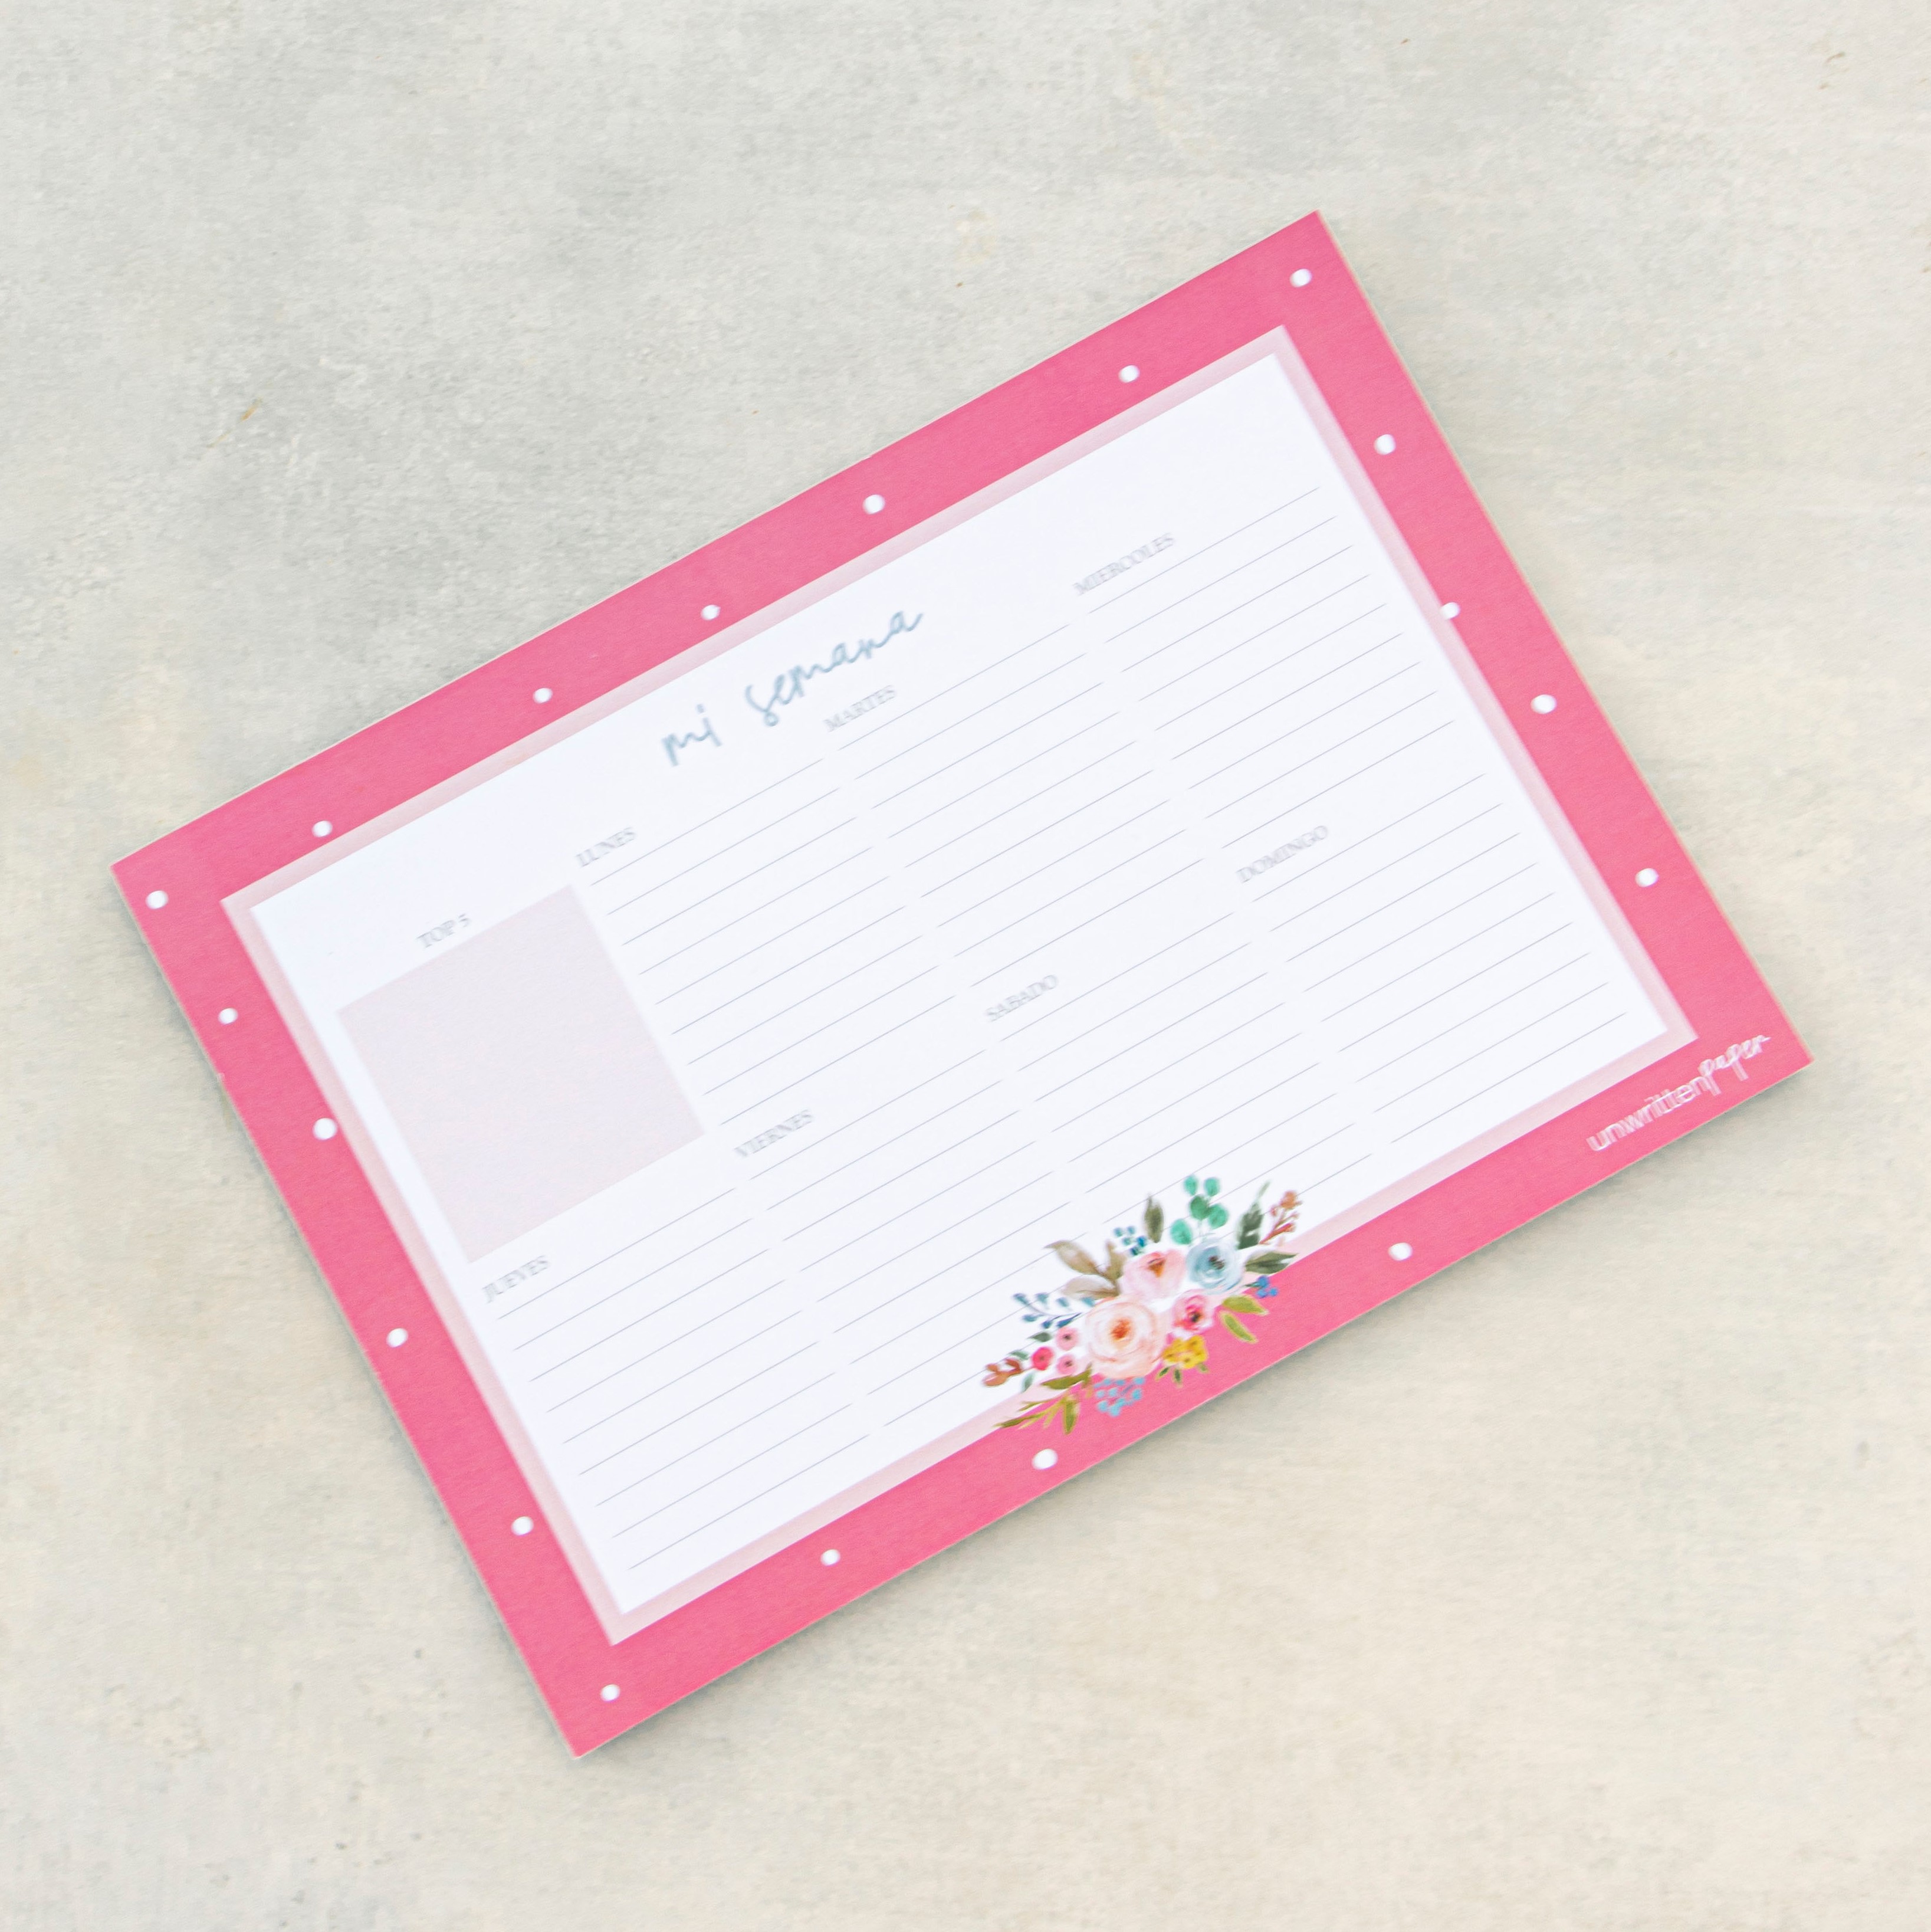 UWP Planner A4 Rosa Oscuro